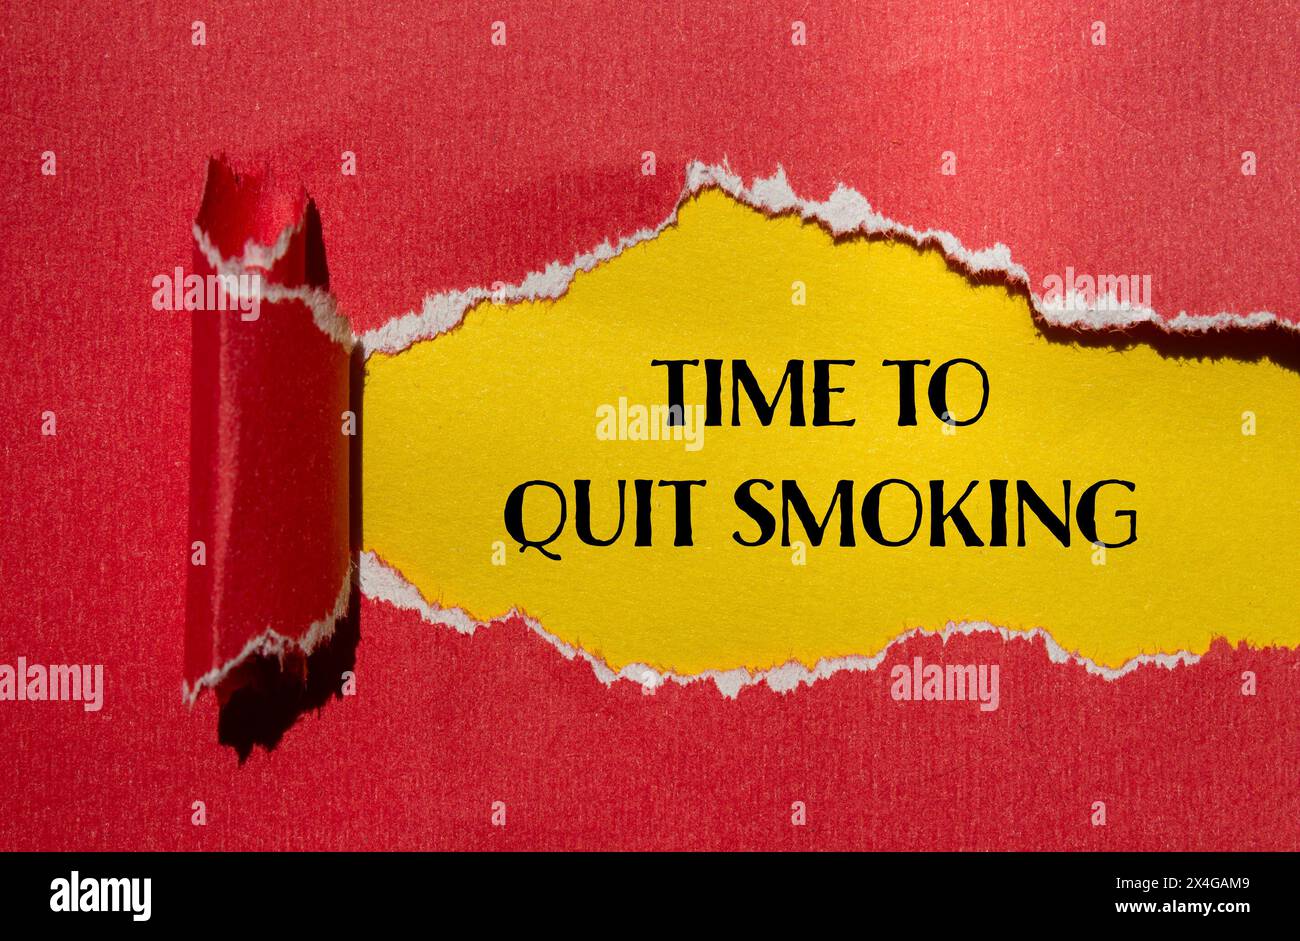 Time to quit smoking words written on ripped red paper with yellow background. Conceptual time to quit smoking concept. Copy space. Stock Photo